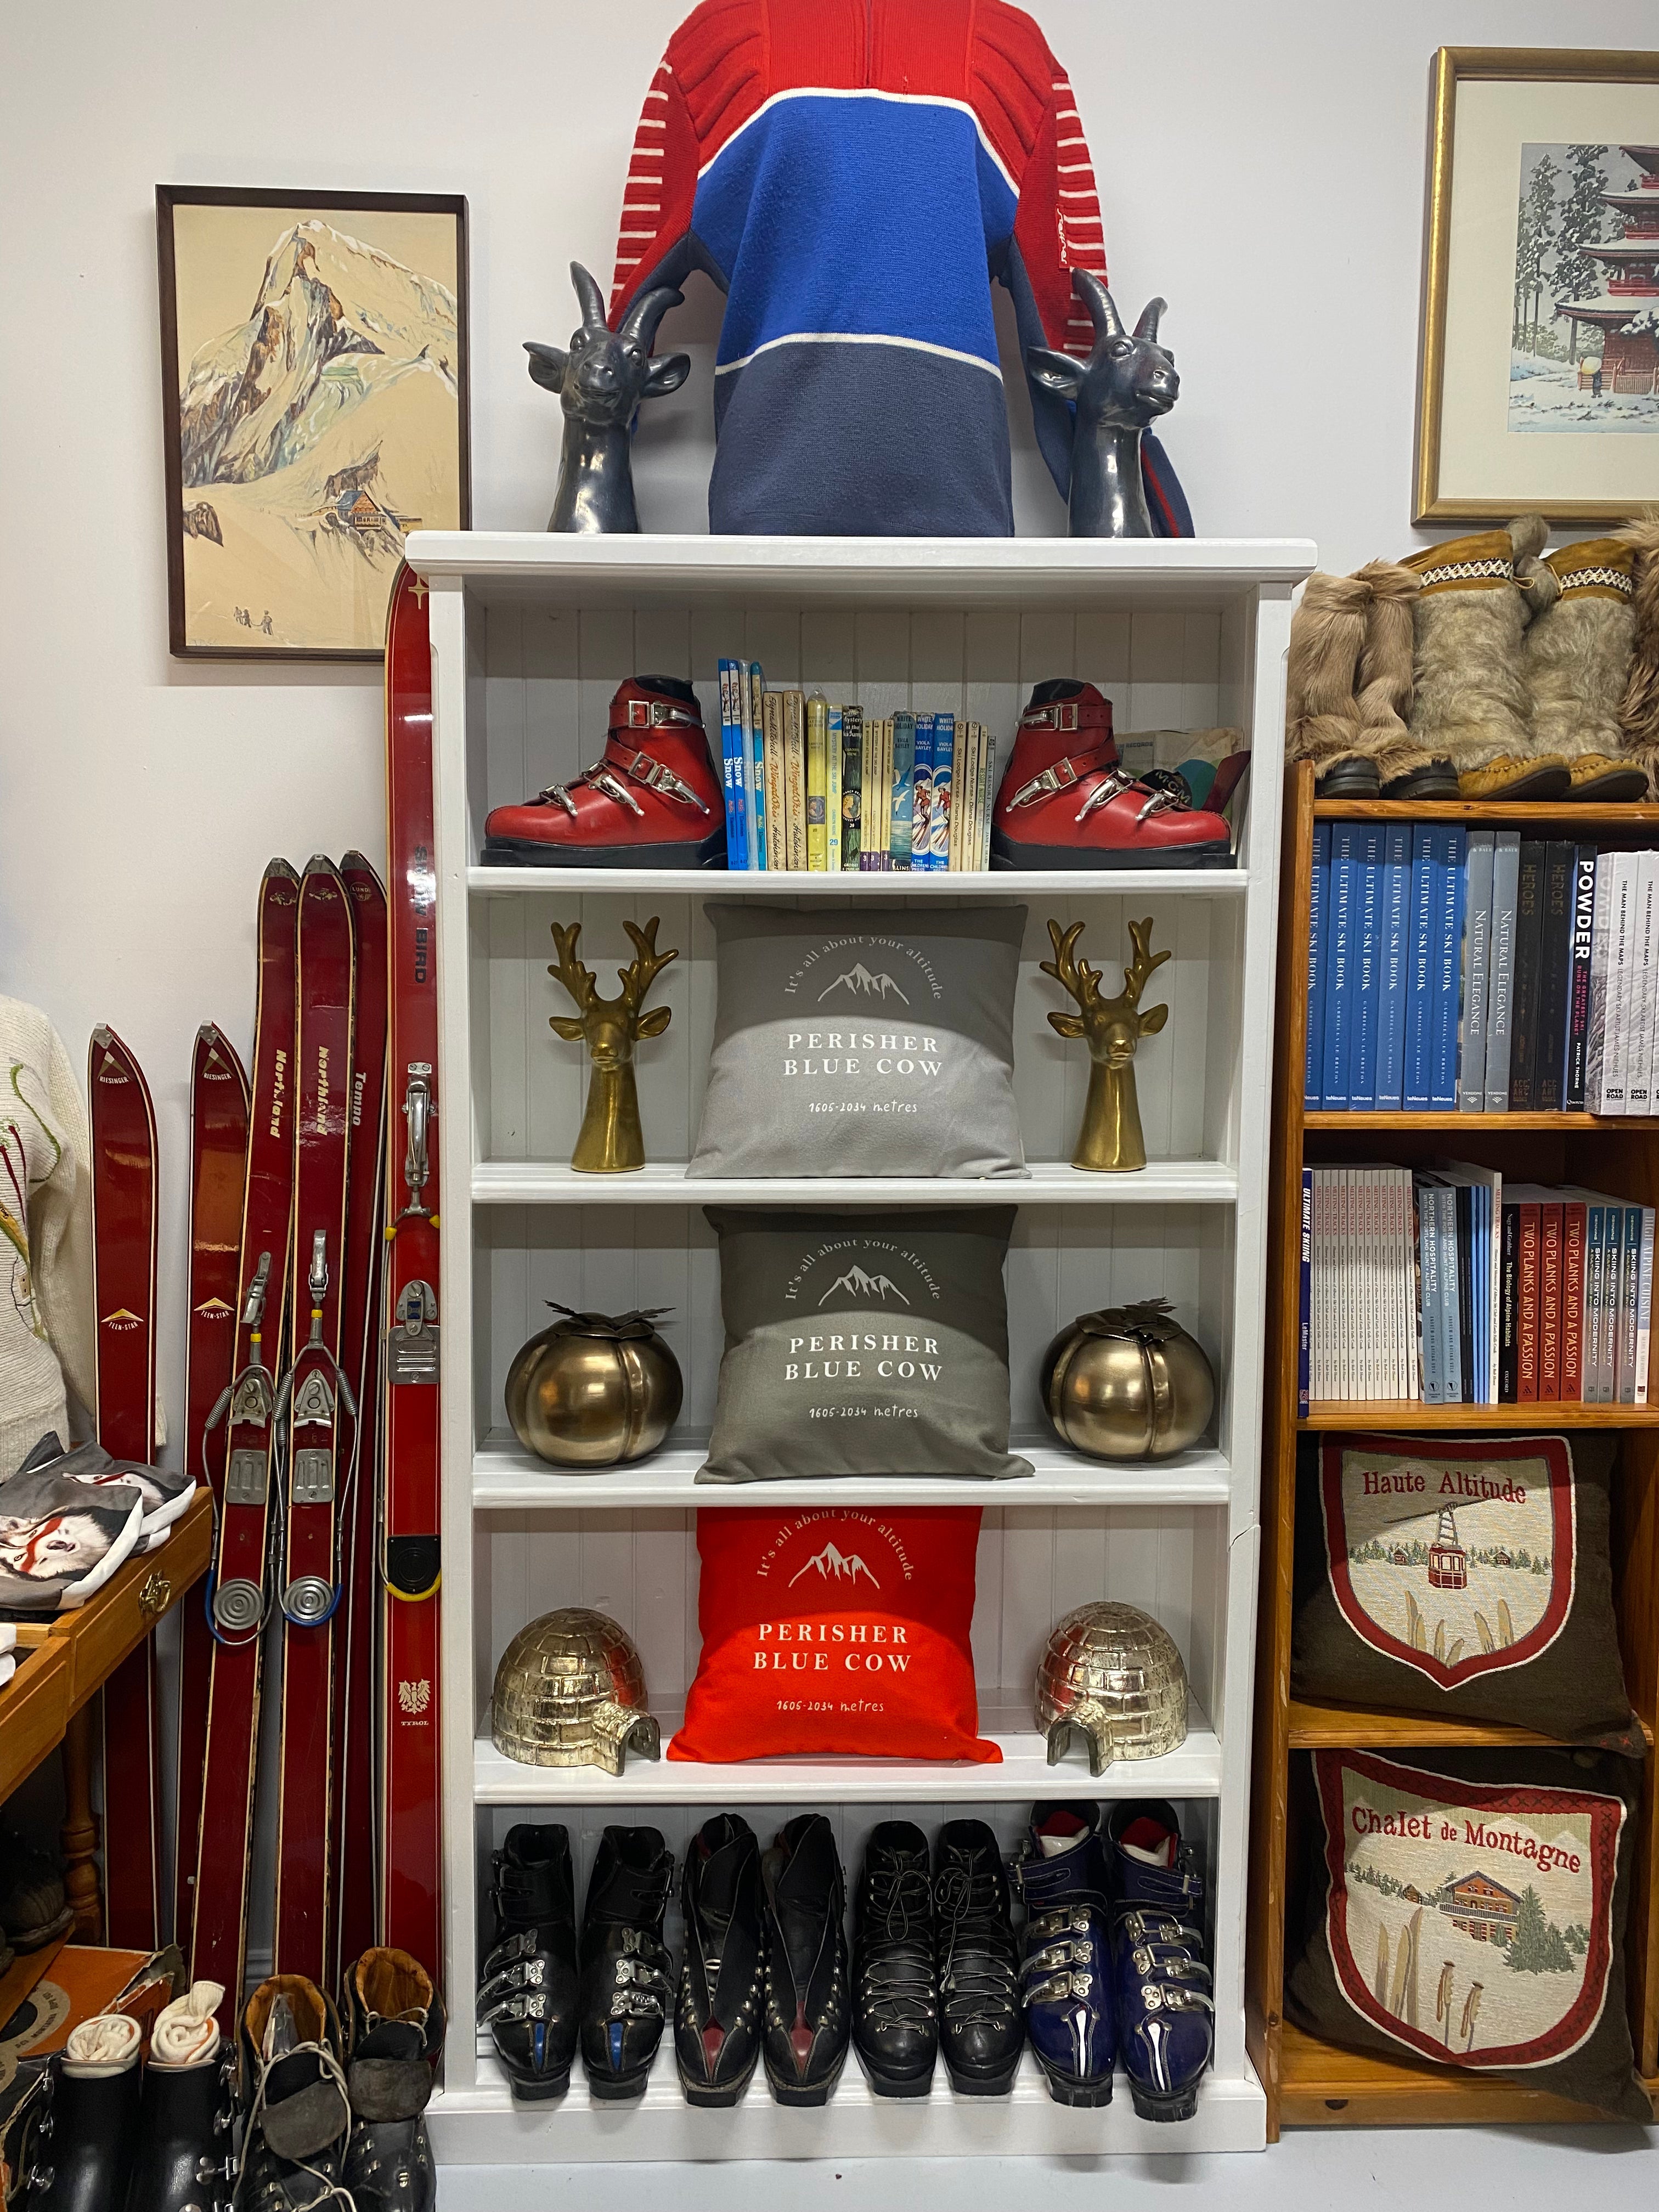 Image of white bookshelf, surrounded by red vintage skis, many nooks and leather ski boots and with red, grey and taupe cushions printed with the words Perisher Blue Cow visible on the cushion and a drawing of a mountain